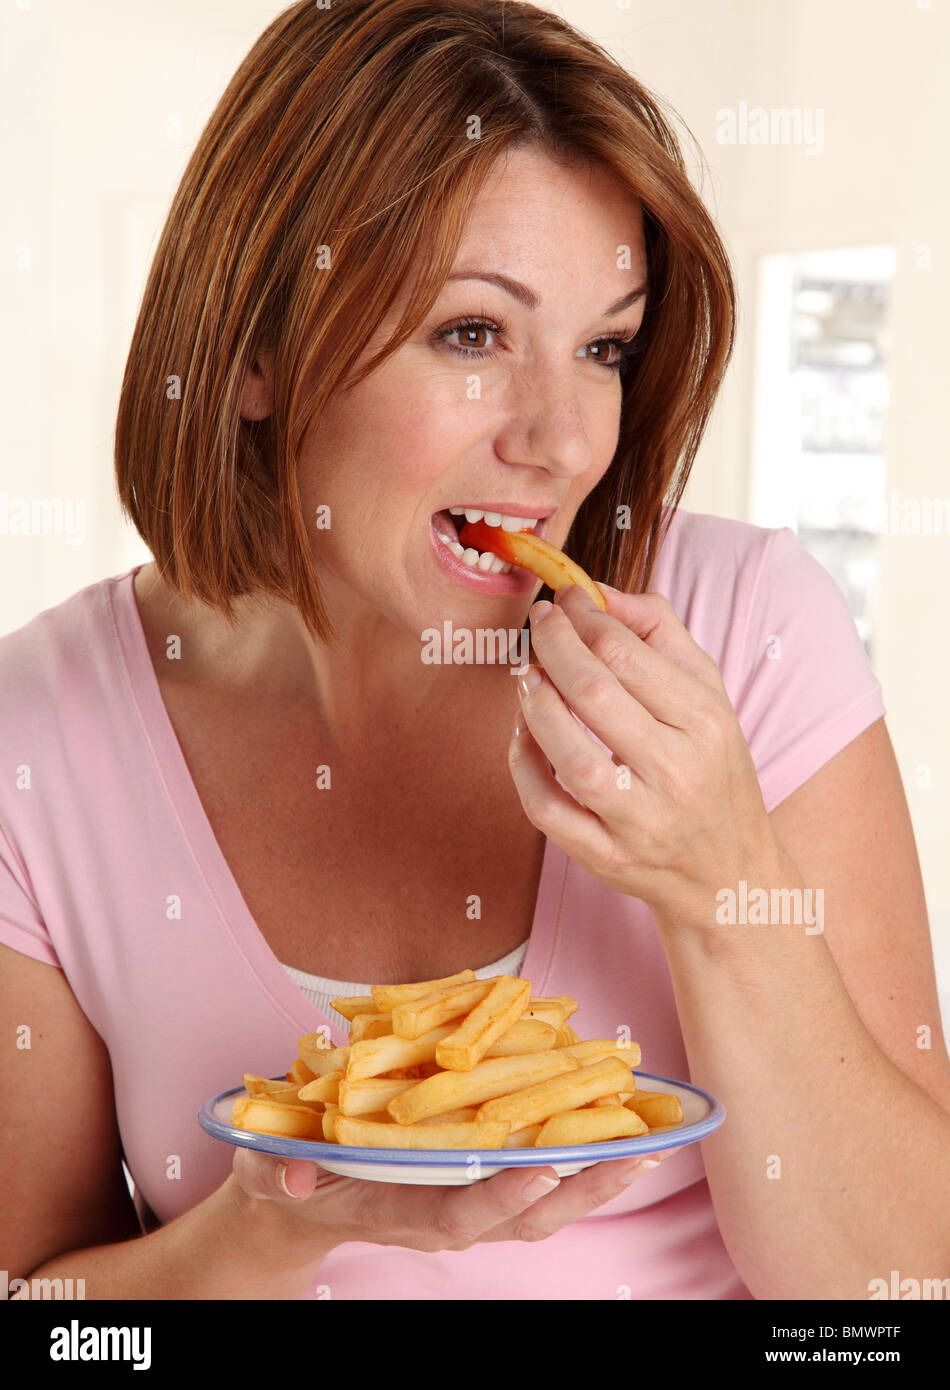 WOMAN EATING FRENCH FRIES Banque D'Images